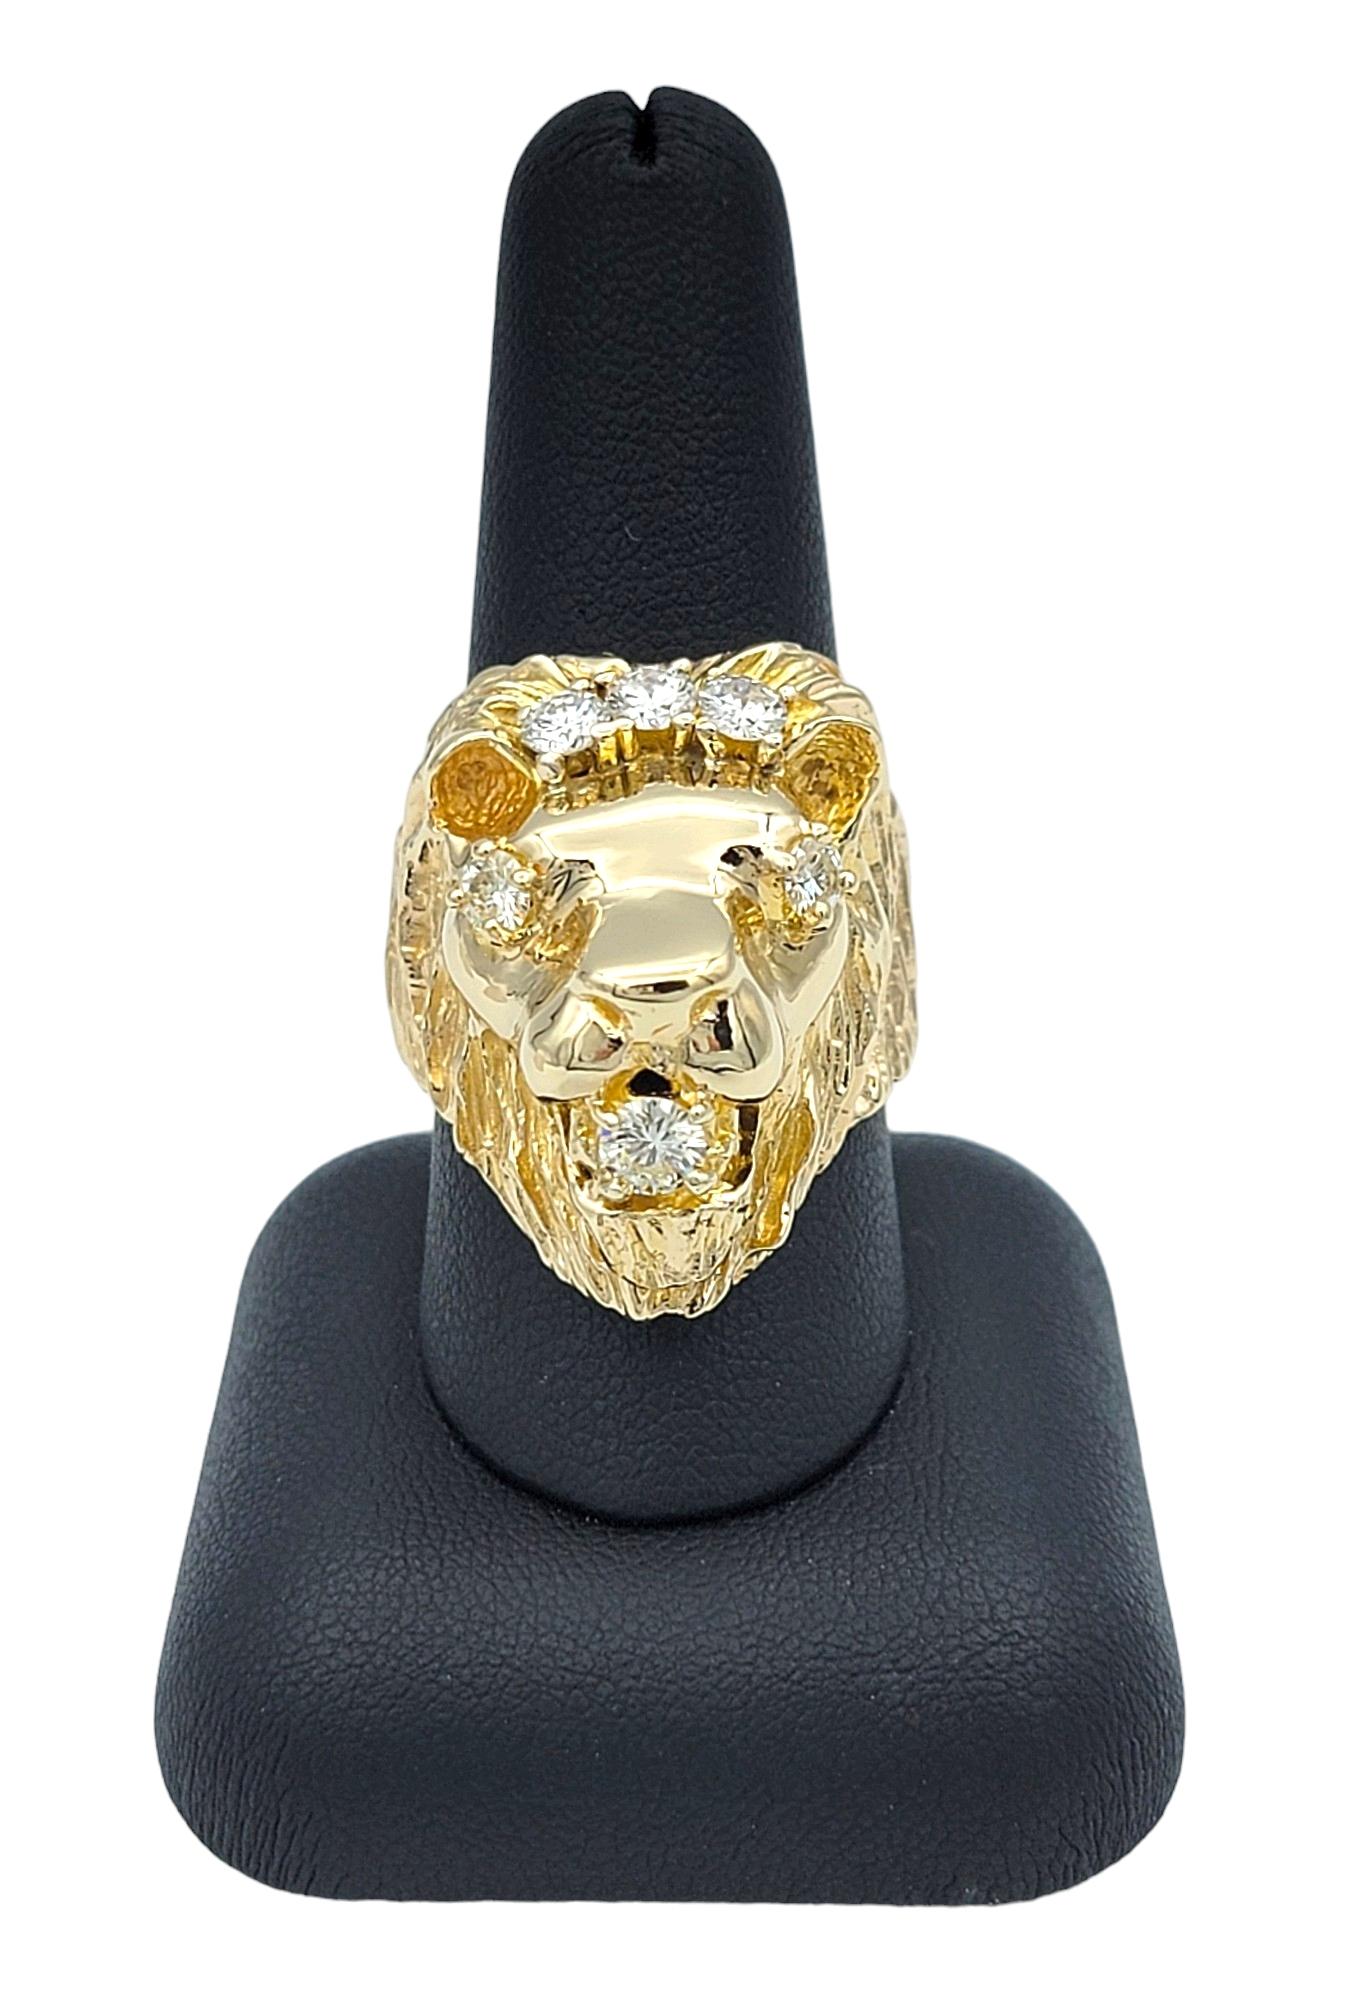 Carved 3D Lion Head with Diamond Accents Bold Ring Set in 14 Karat Yellow Gold For Sale 3